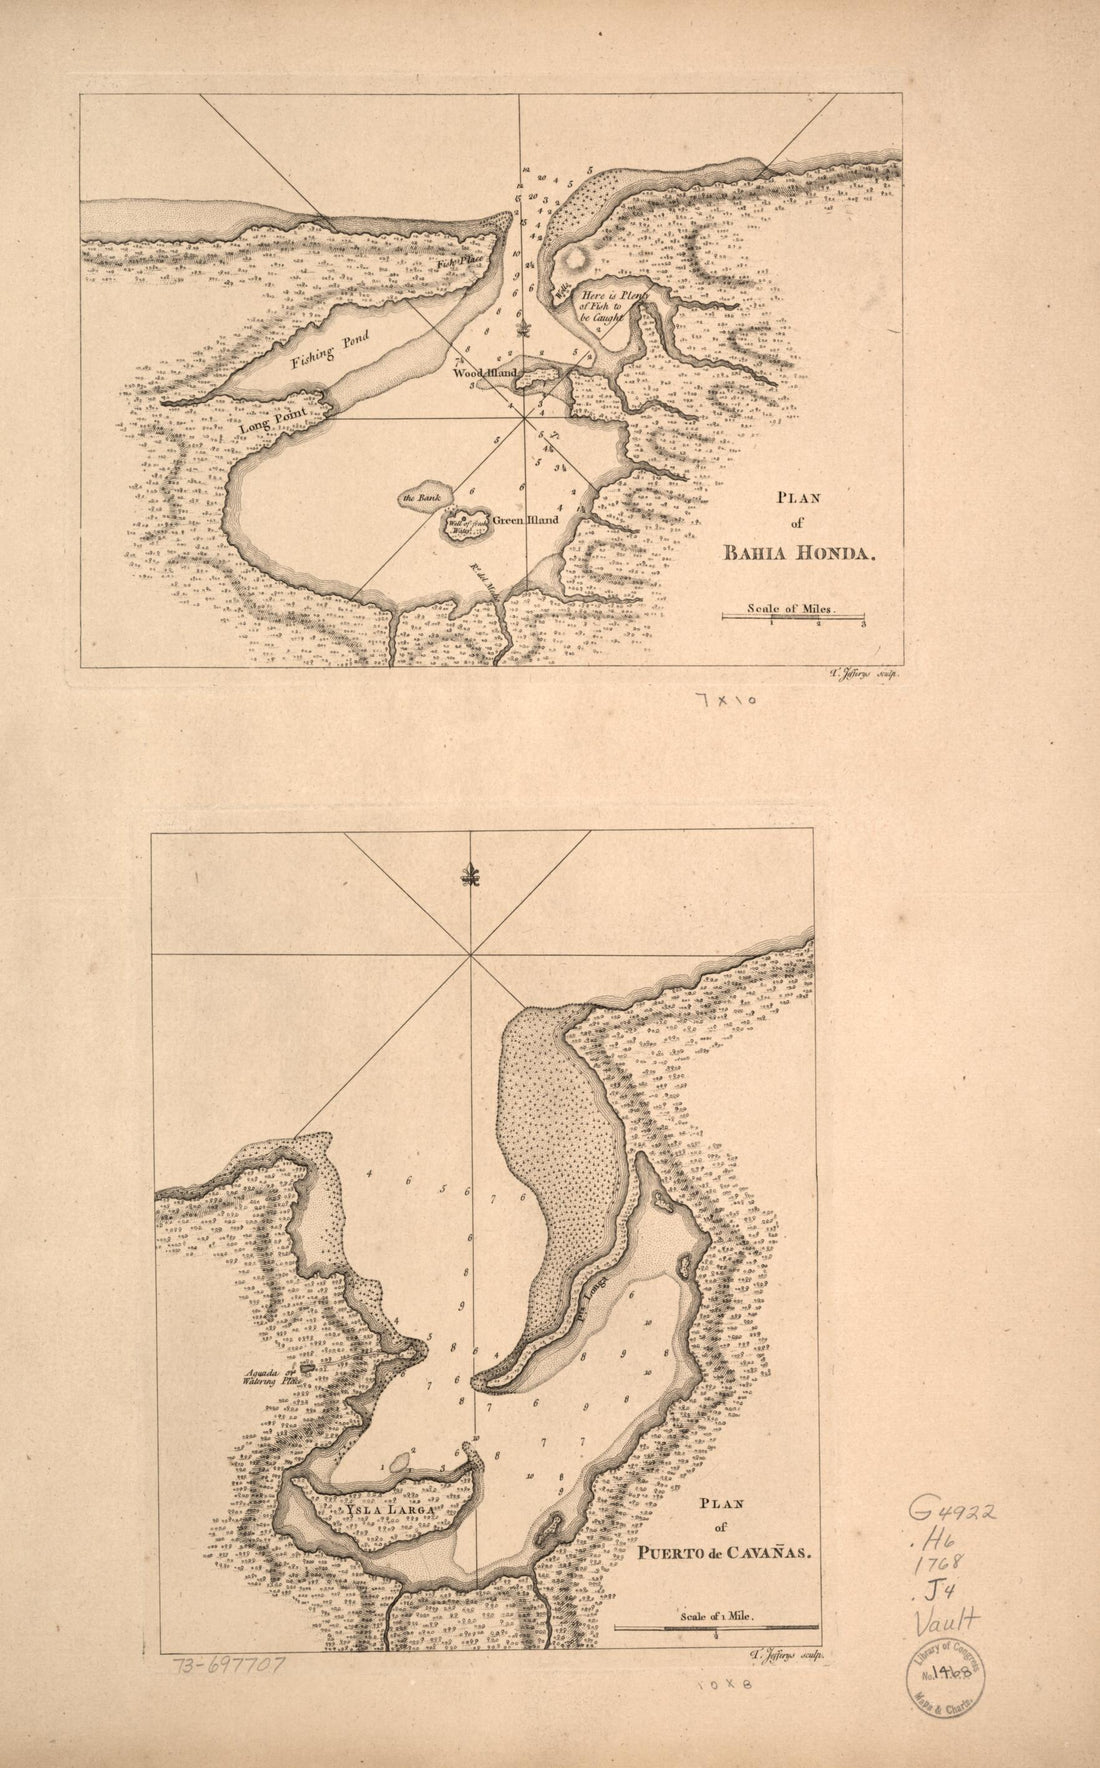 This old map of Plan of Bahía Honda. Plan of Puerto De Cavañas from 1768 was created by Thomas Jefferys in 1768